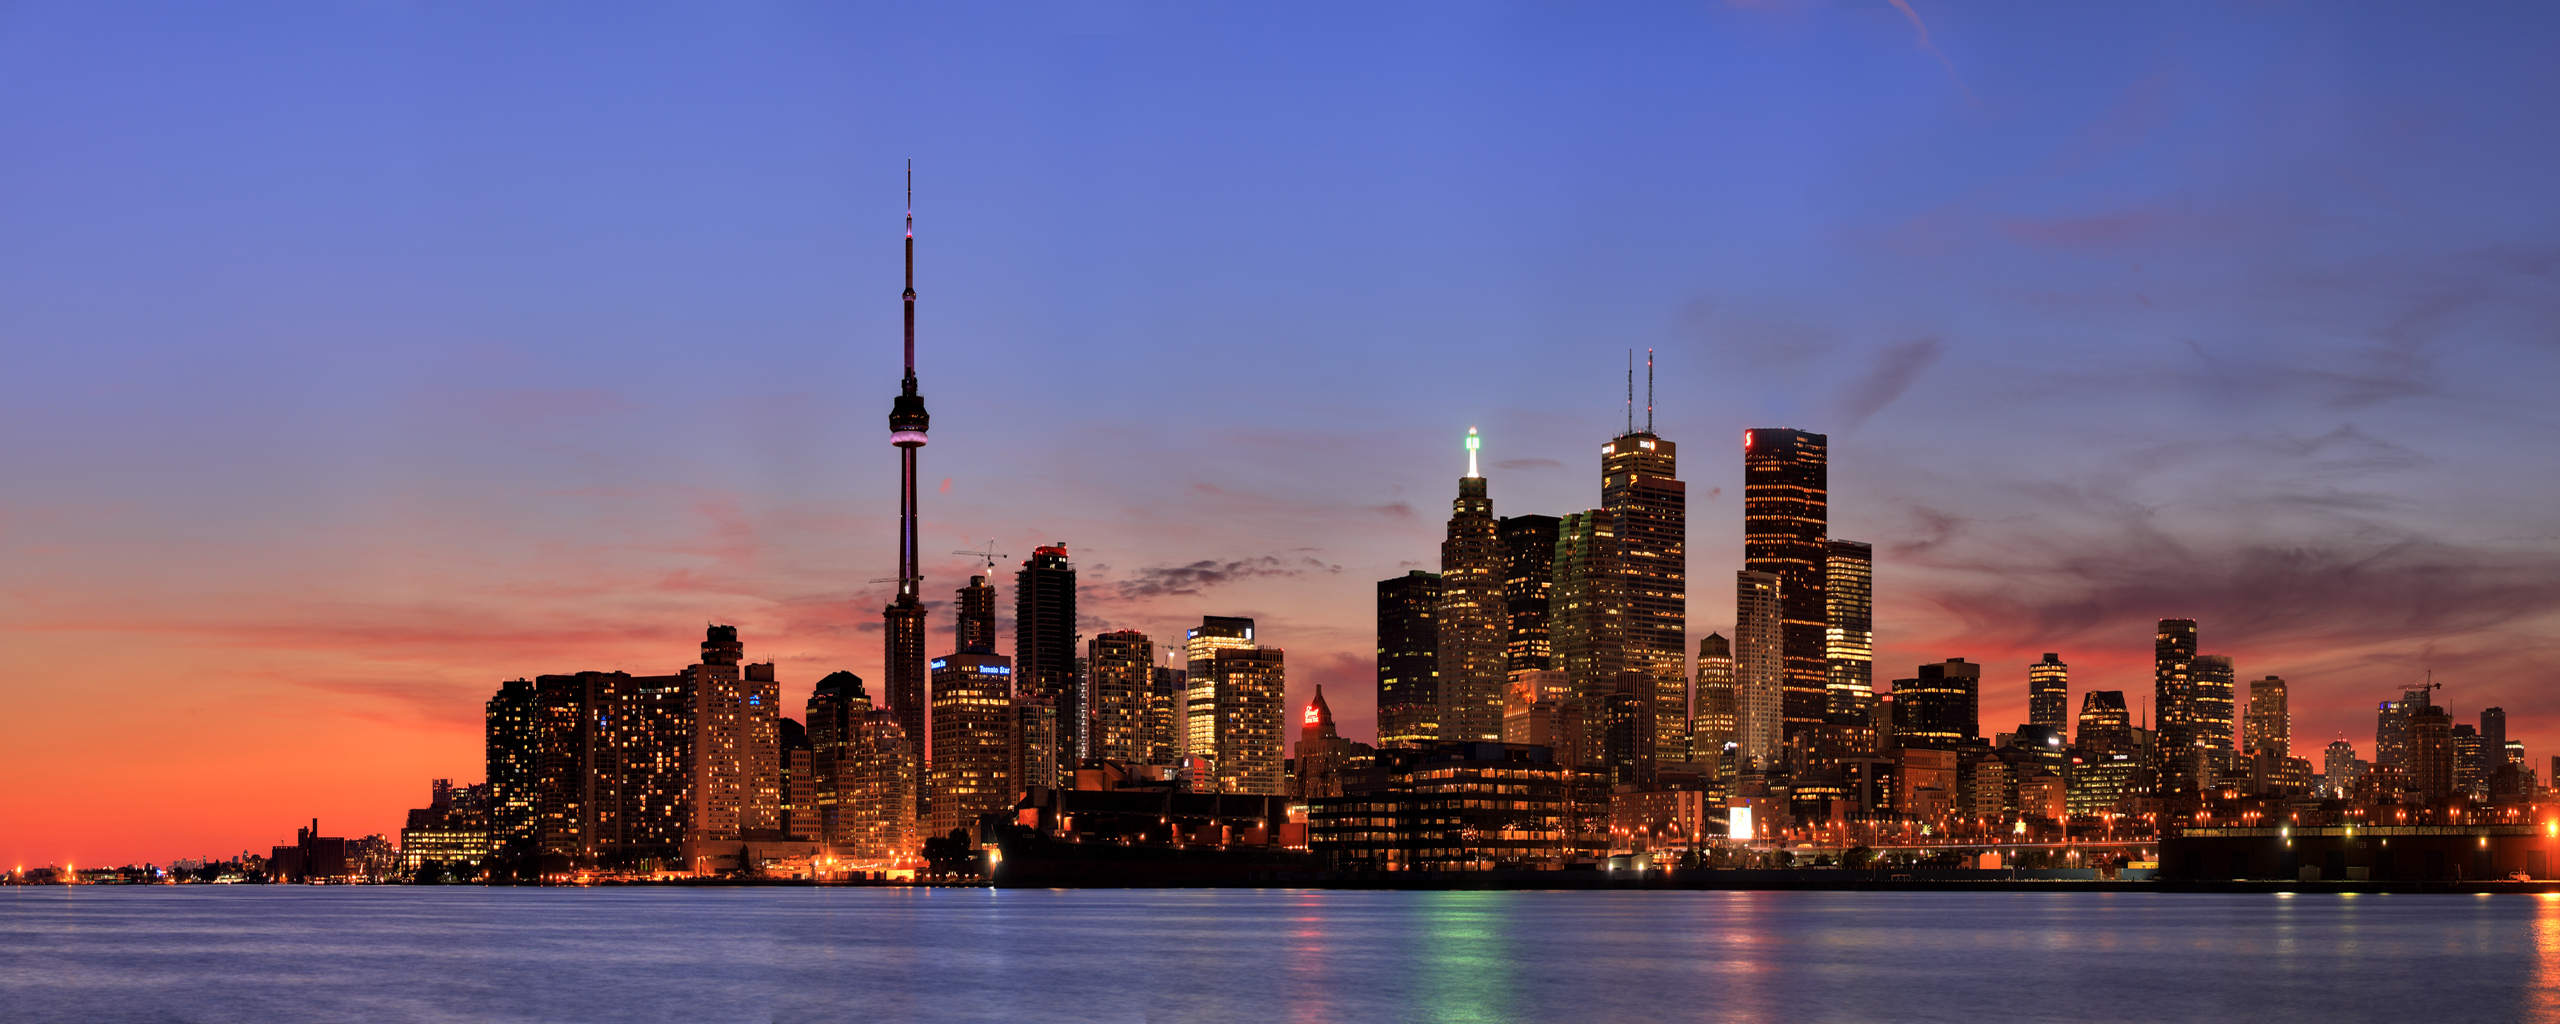 HD Toronto Canada With Resolutions Pixel